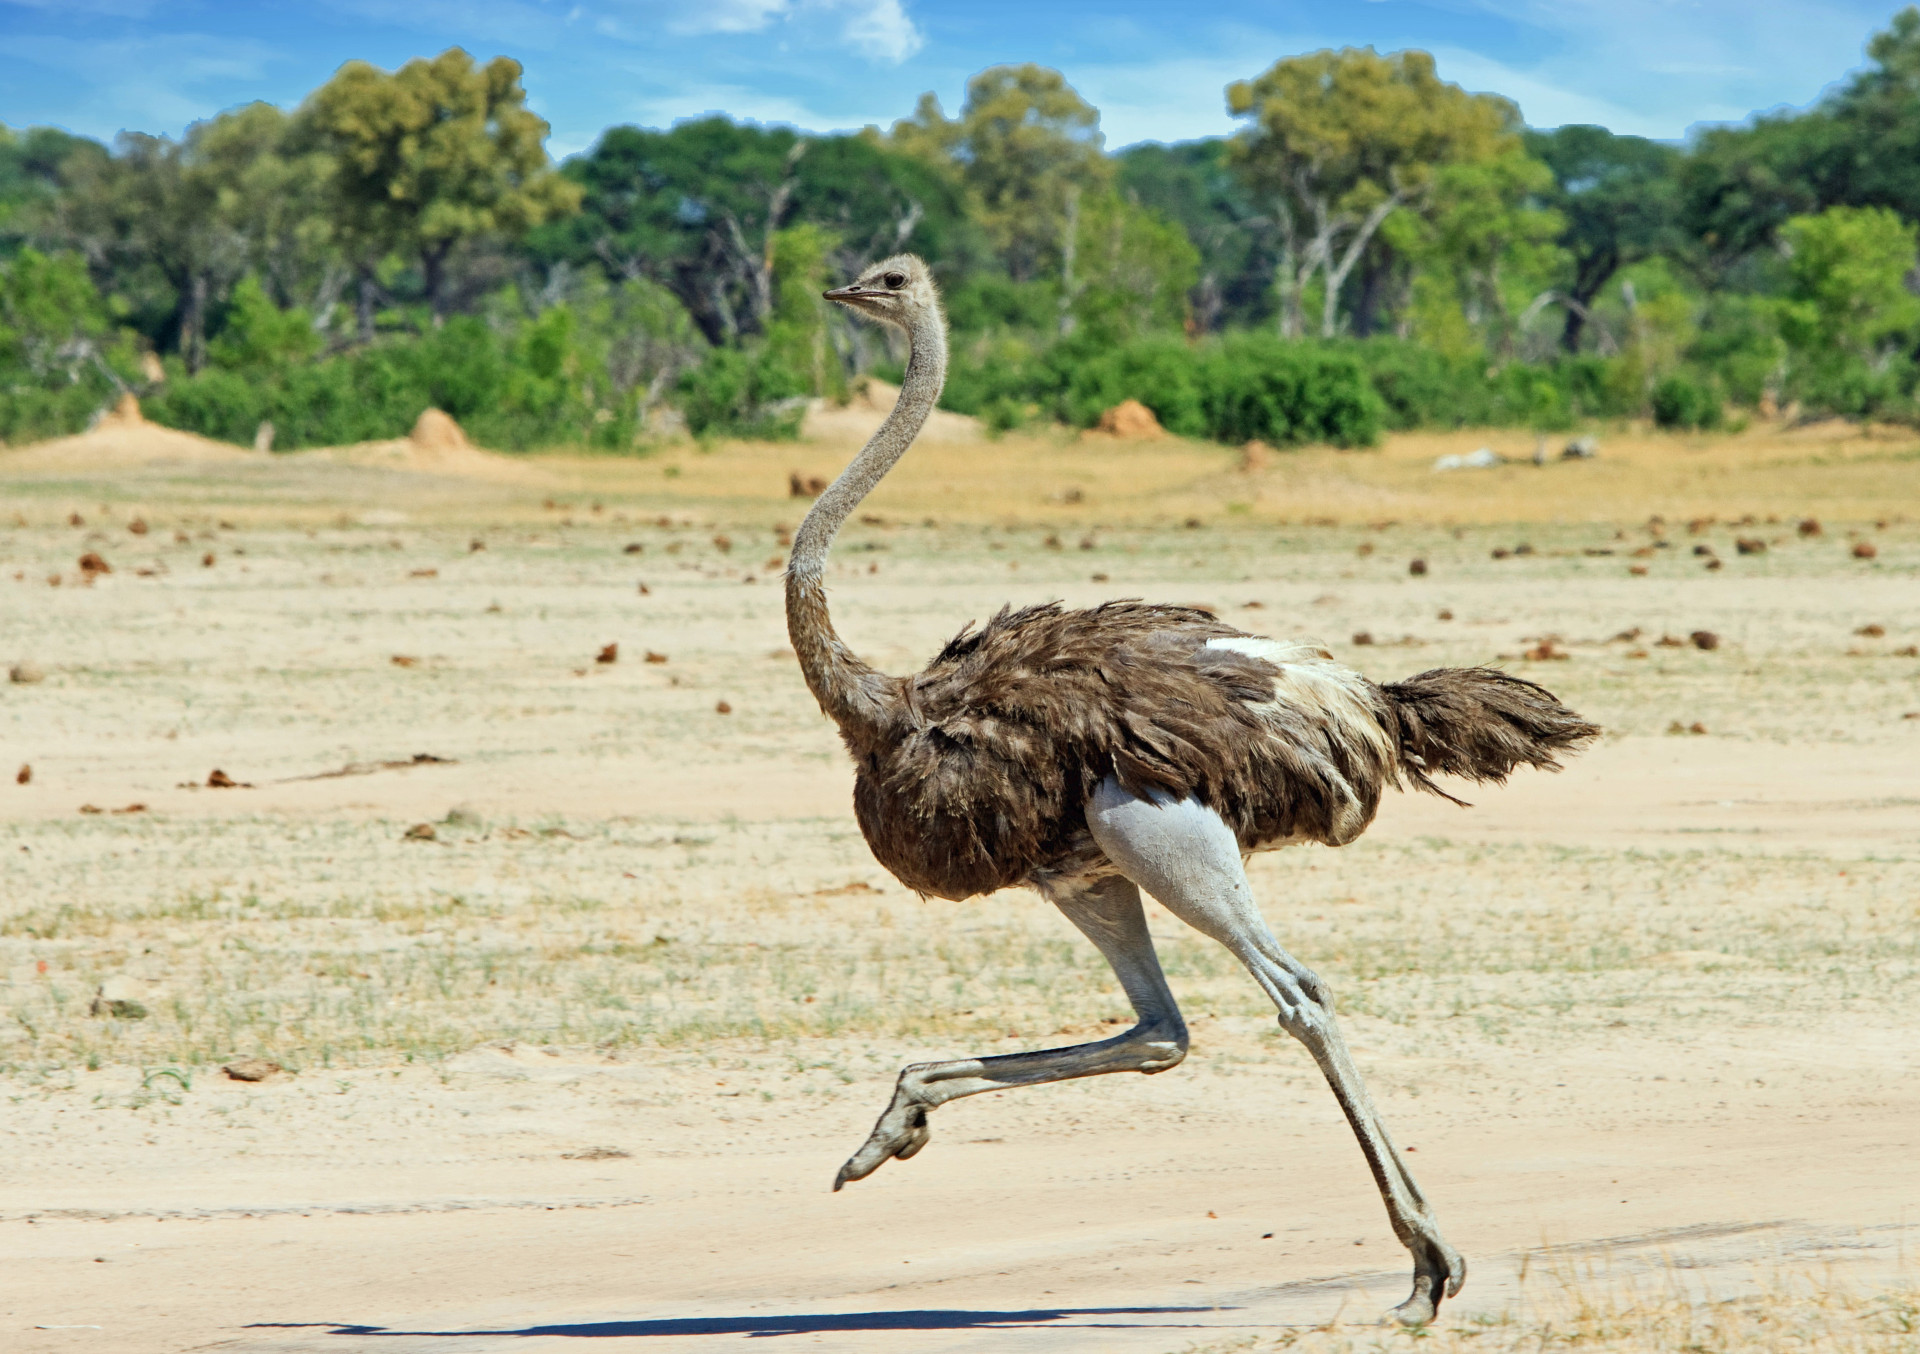 <p>Here you will also find incredible ostriches roaming freely.</p><p>See also: <a href="https://www.msn.com/en-gb/lifestyle/other/vulnerable-dog-breeds-that-could-go-extinct/ss-AA19QLMA?ocid=Peregrine"><span>Vulnerable dog breeds that could go extinct</span></a> </p>